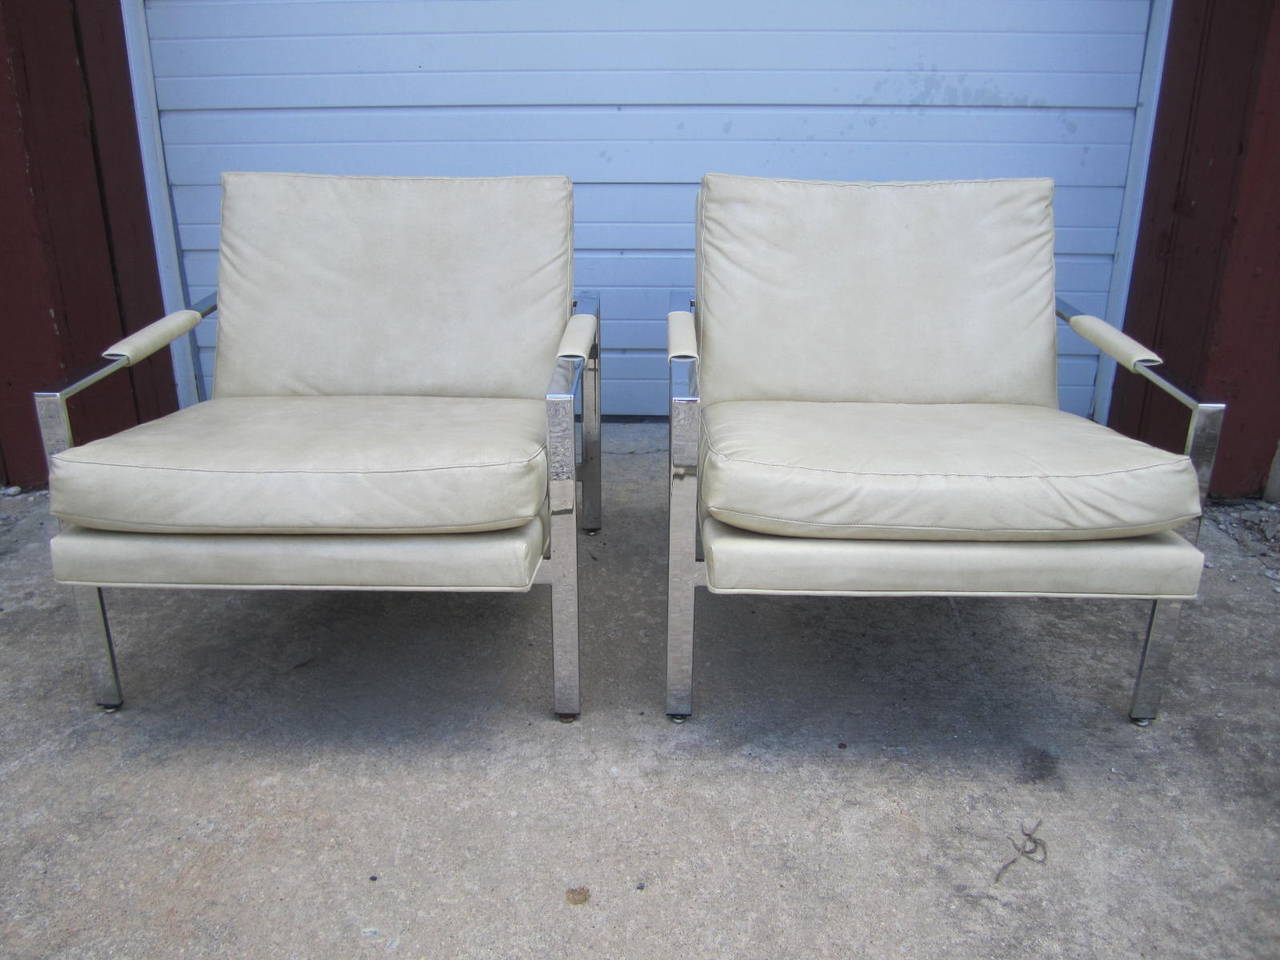 Fabulous pair of Milo Baughman Thayer Coggin chrome flat bar cube chairs. Upholstery is a cream colored faux leather in presentable condition. Would be even better reupholstered in something fresh. We do offer an upholstery service if needed. The